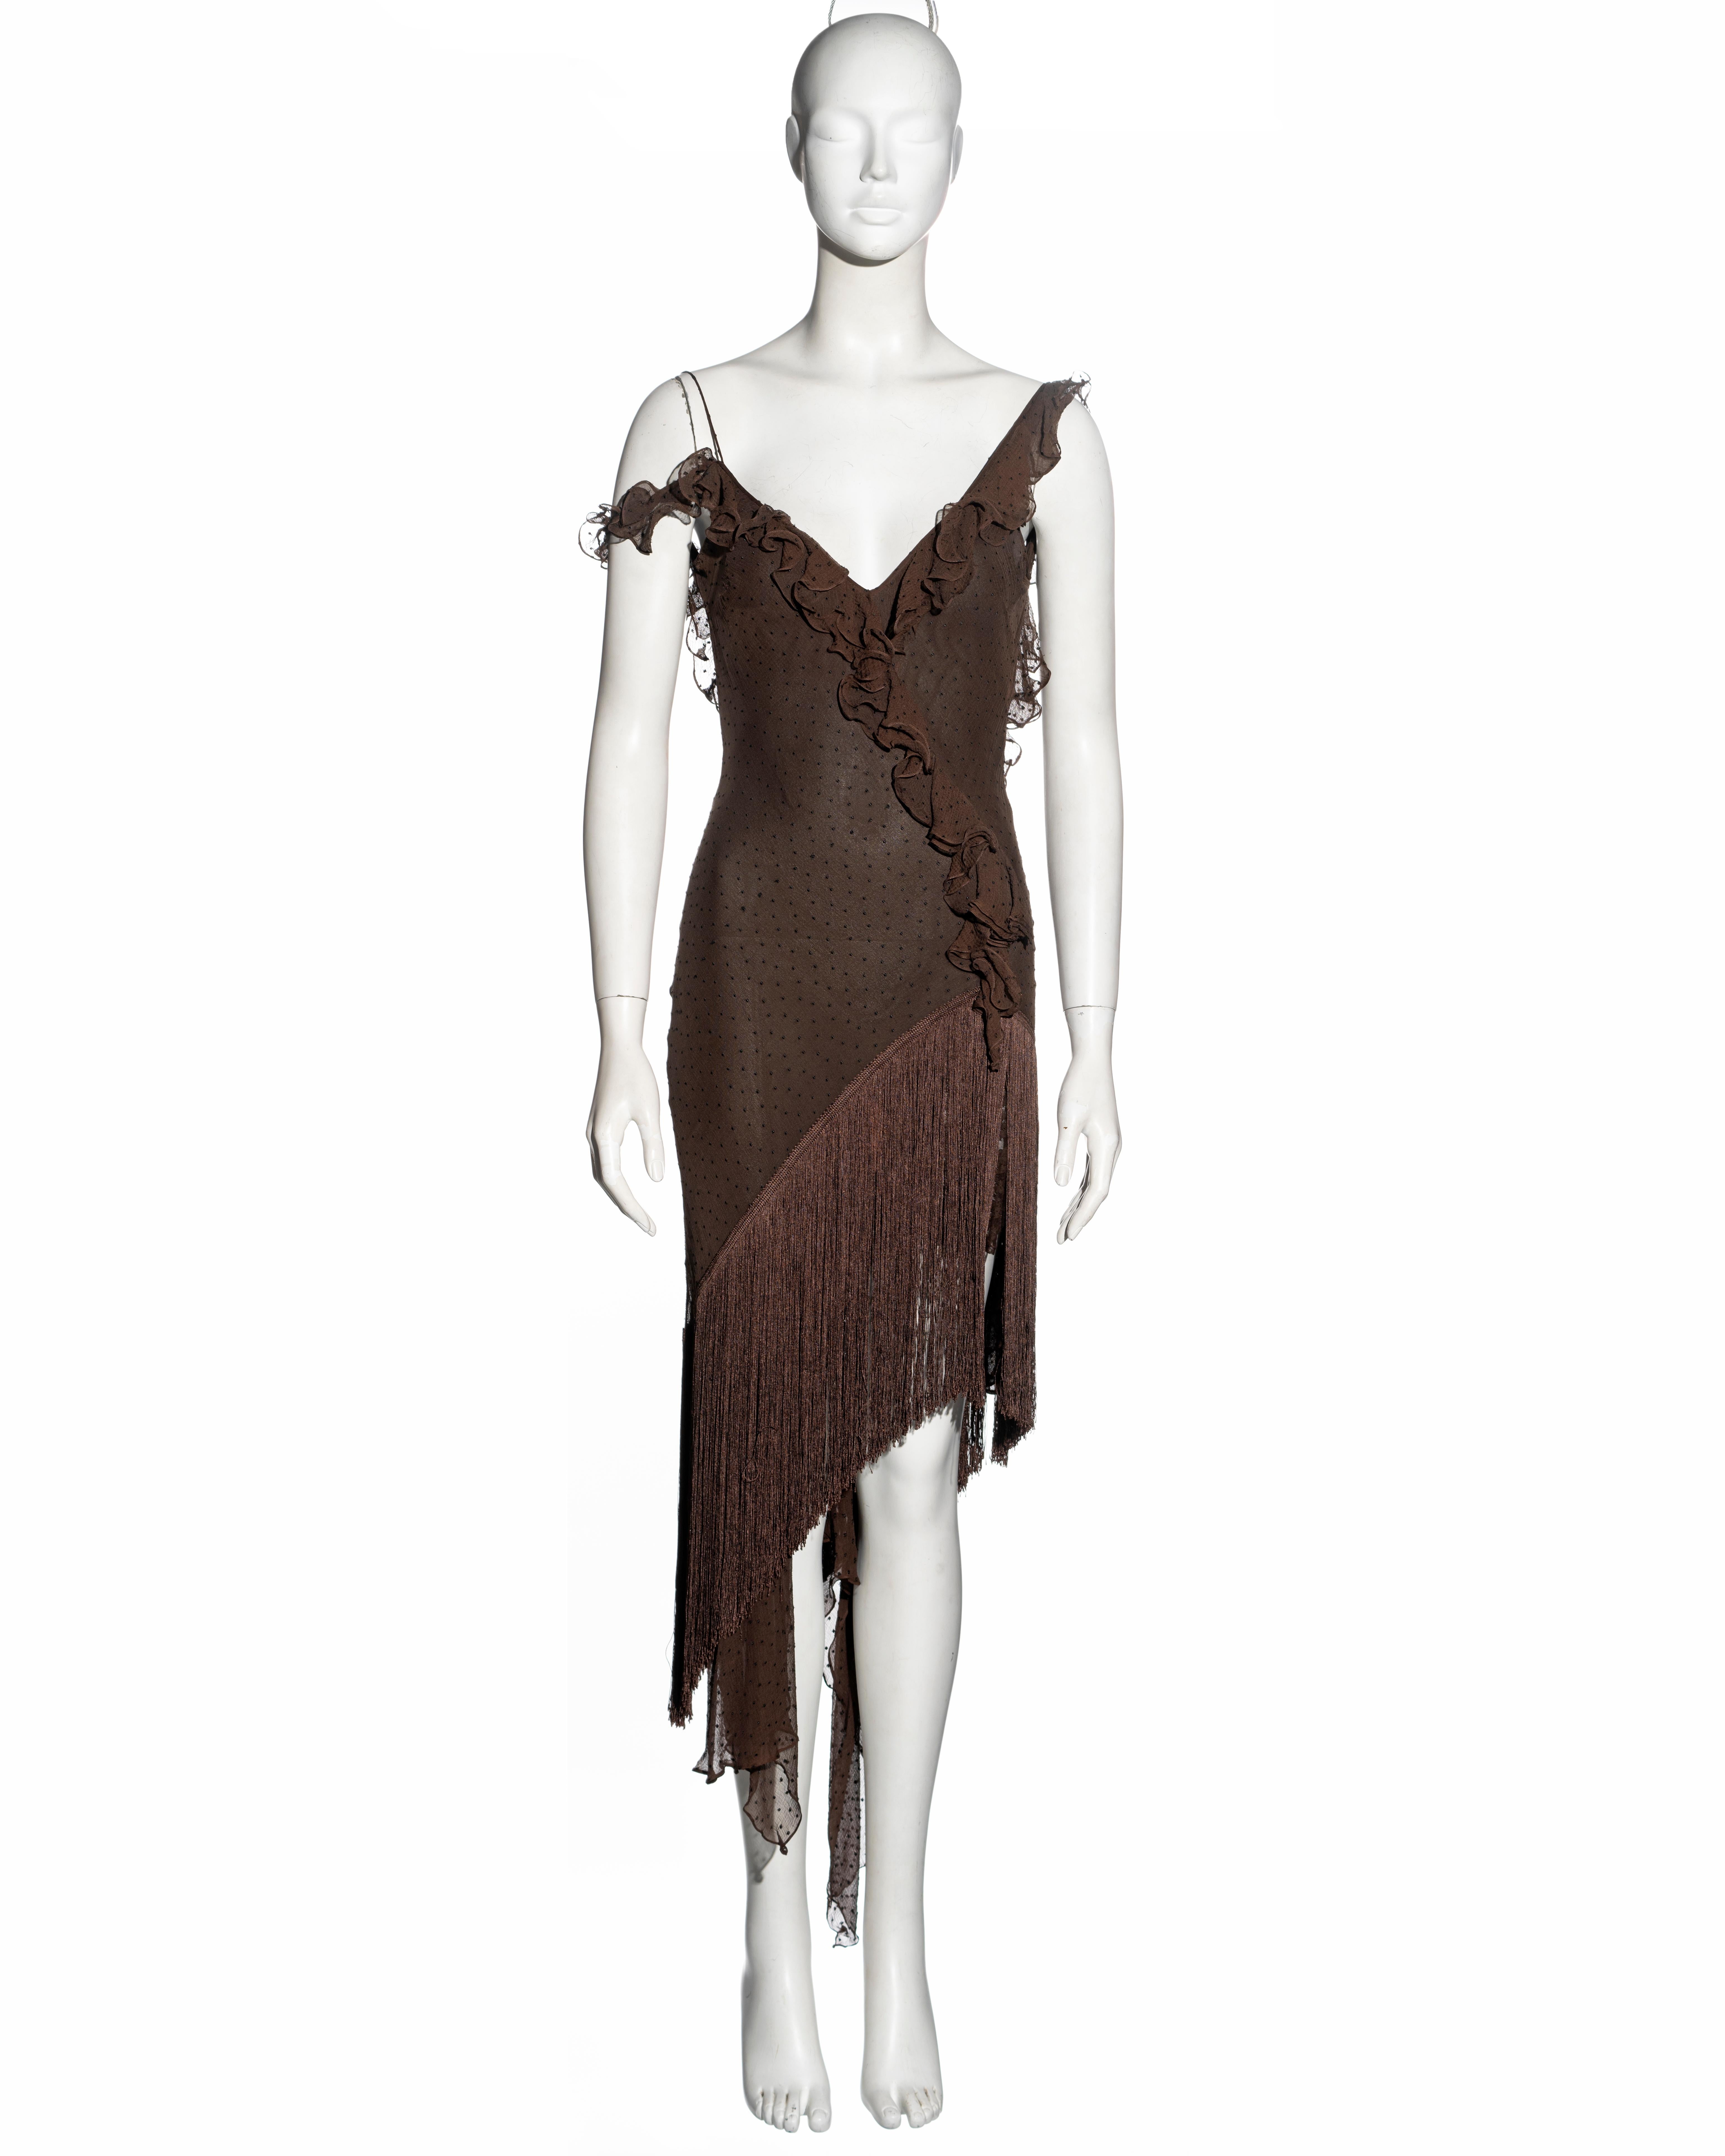 ▪ Christian Dior evening dress
▪ Designed by John Galliano
▪ Sold by One of a Kind Archive
▪ Constructed from bias-cut brown silk chiffon with embroidered polkadots 
▪ Frilled trim at the neckline, shoulder straps and bodice
▪ Long silk fringe skirt